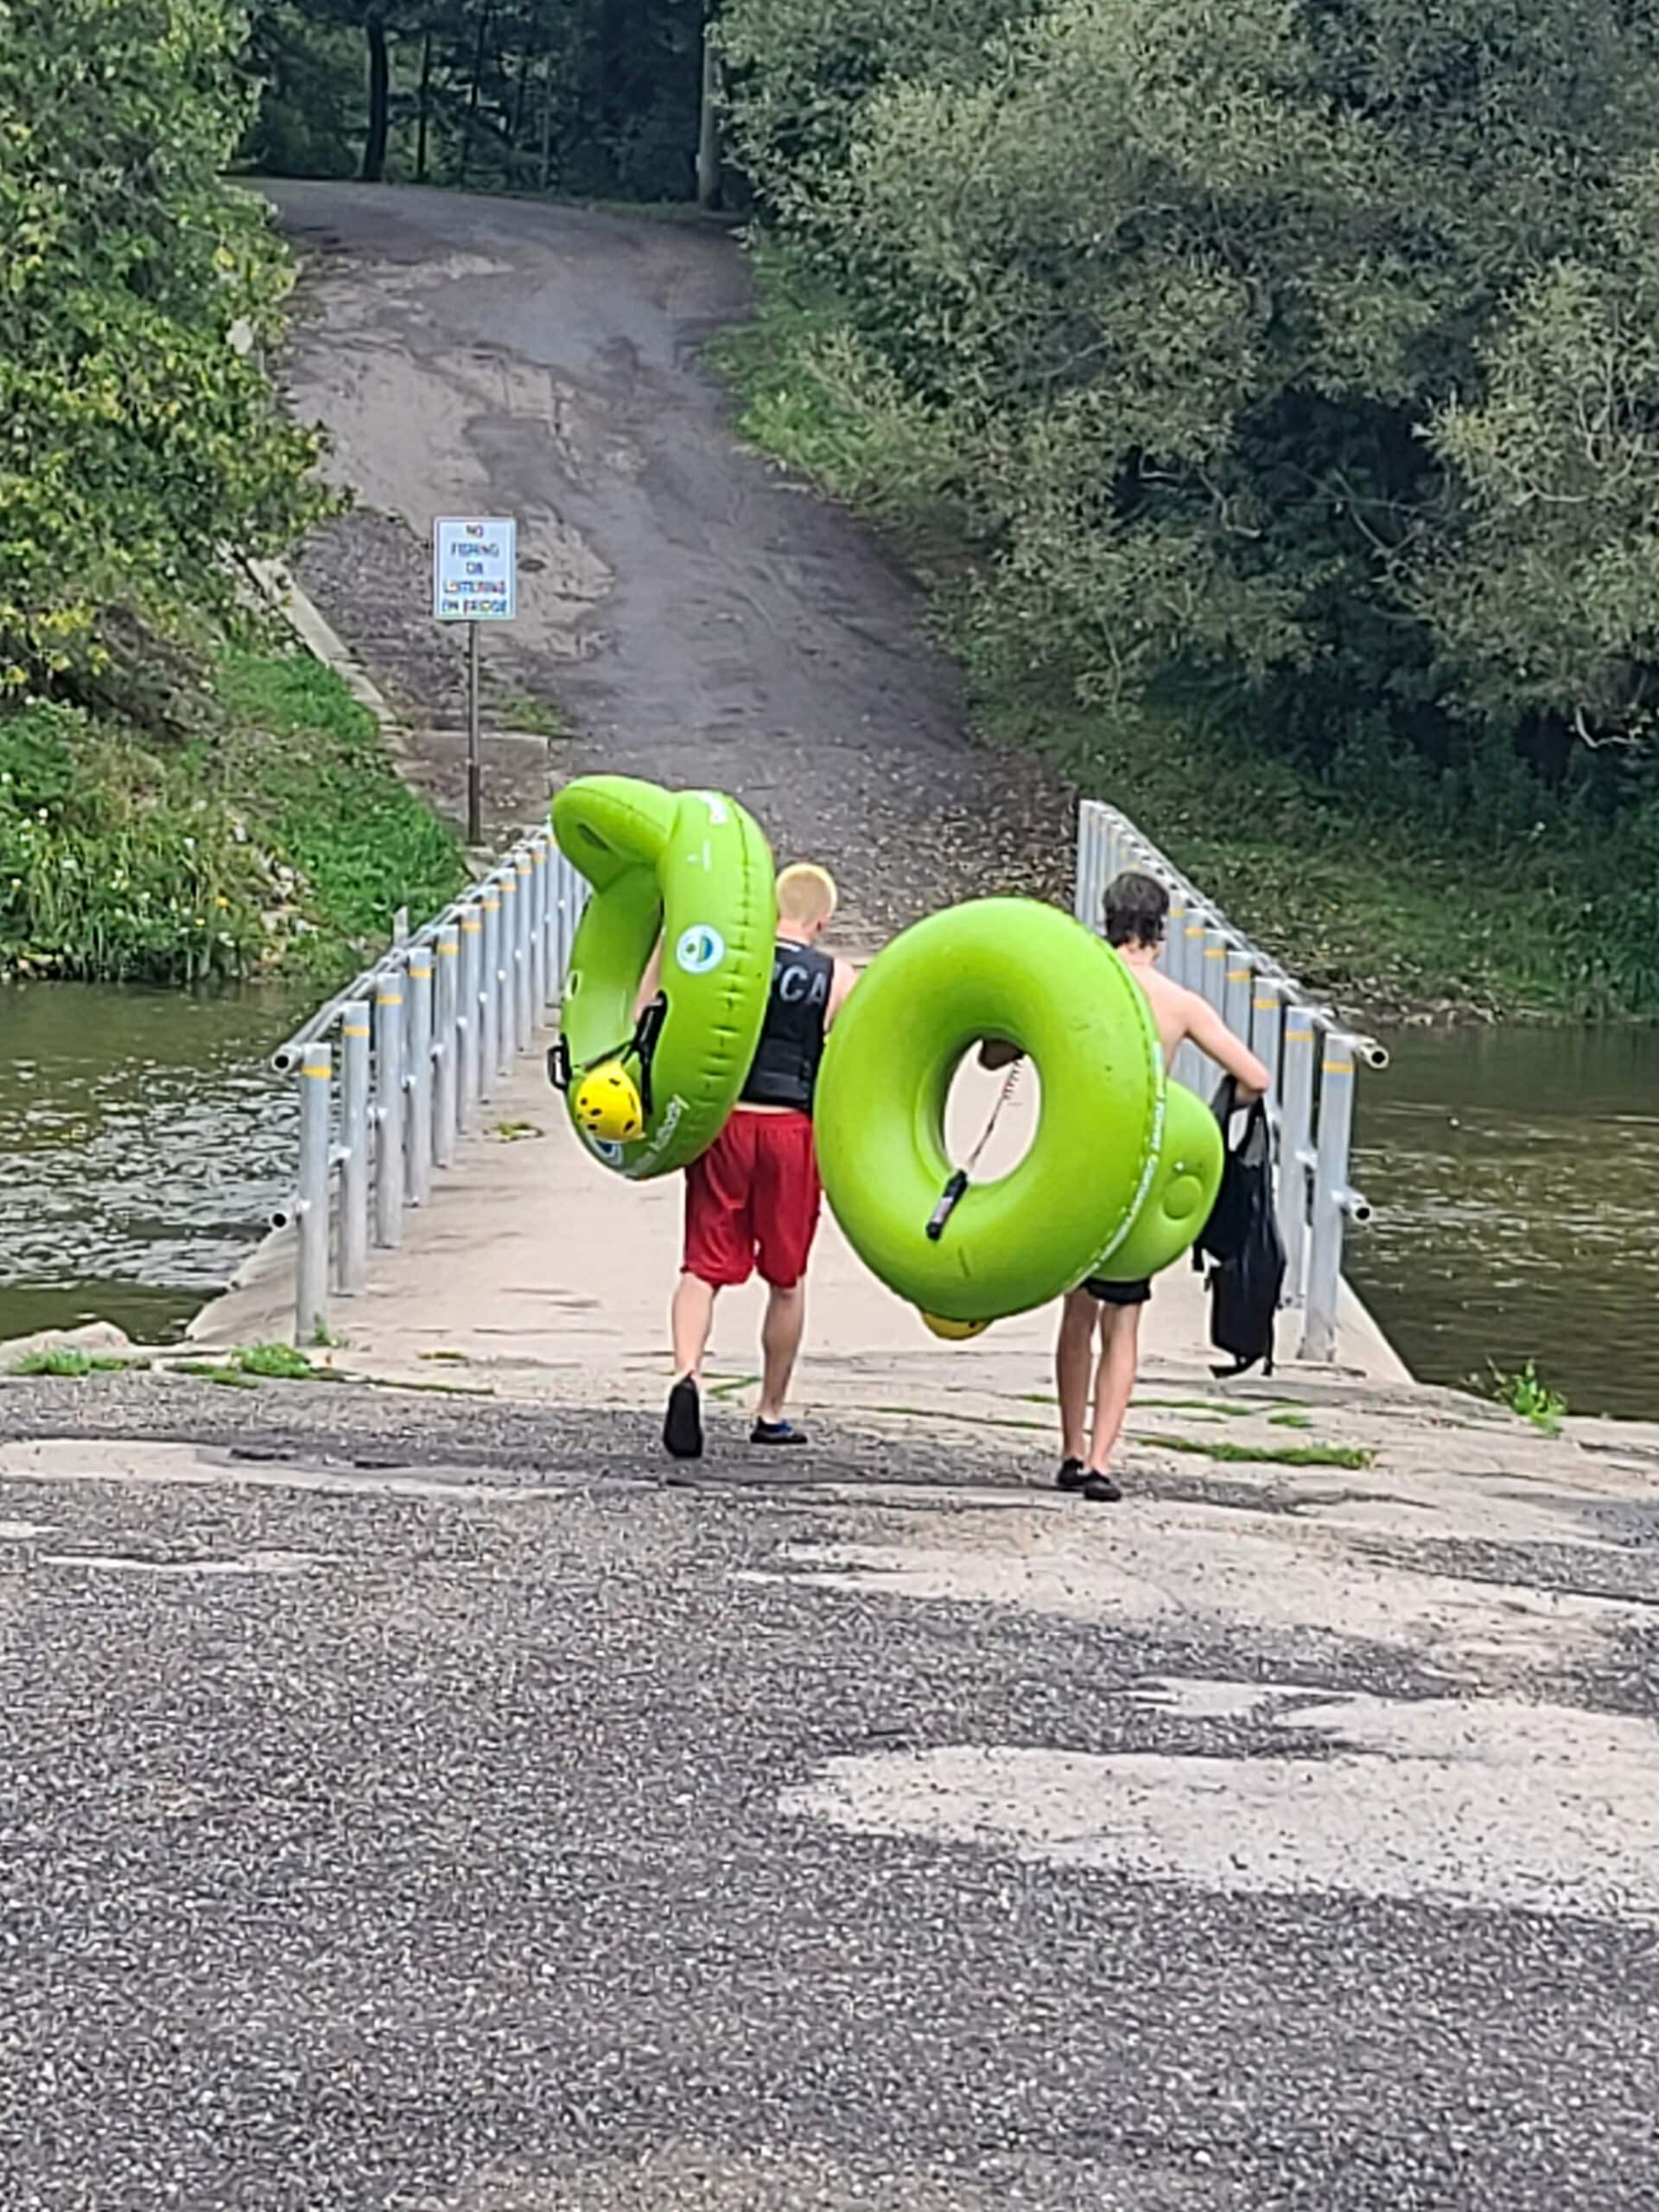 Several people carrying bright green inner tubes, walking away from the photographer.